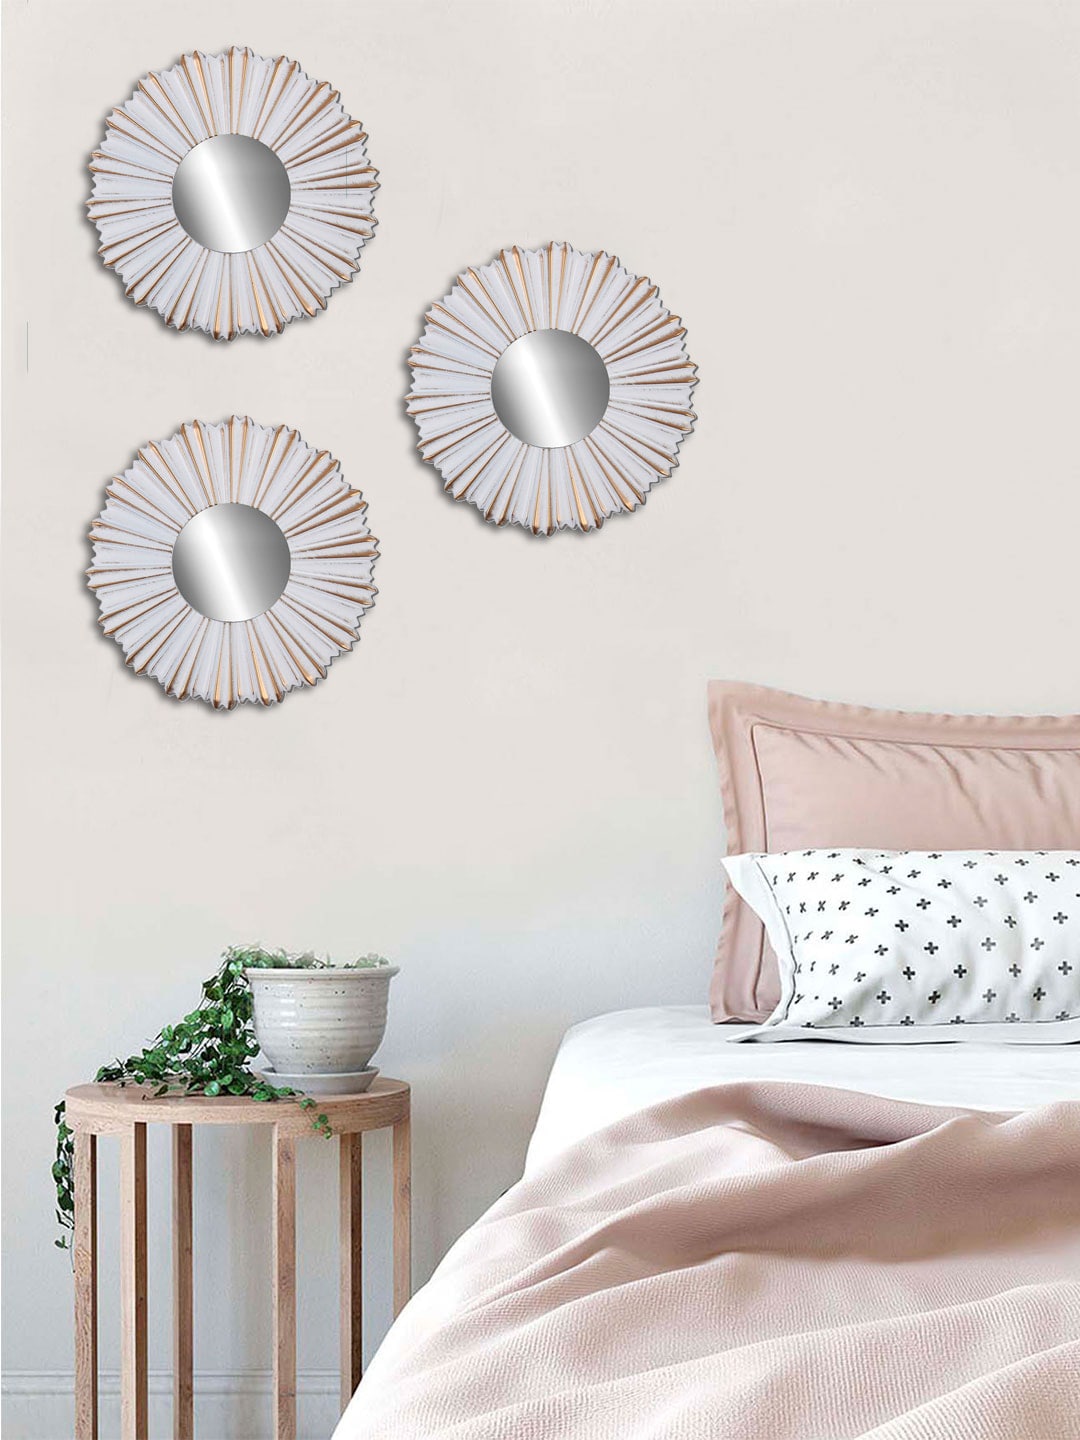 Art Street Set Of 3 White & Gold-Toned Wall Mirrors Price in India